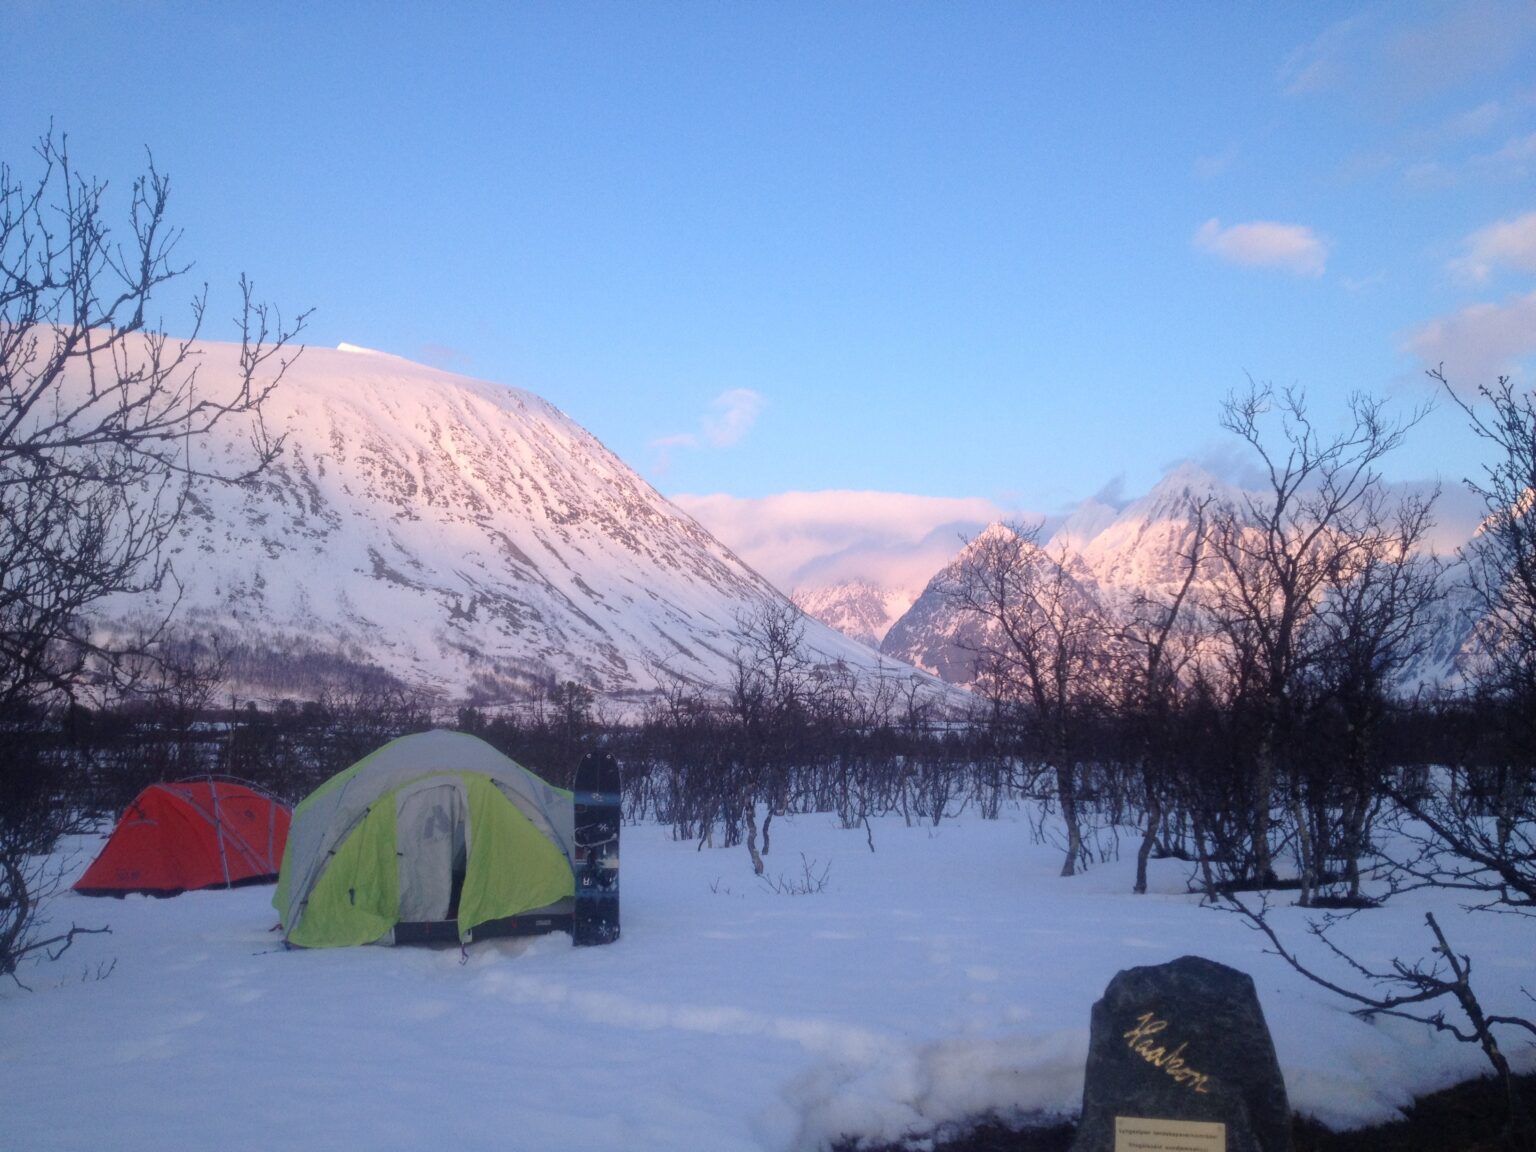 Camping on the west side of the Lyngen Alps